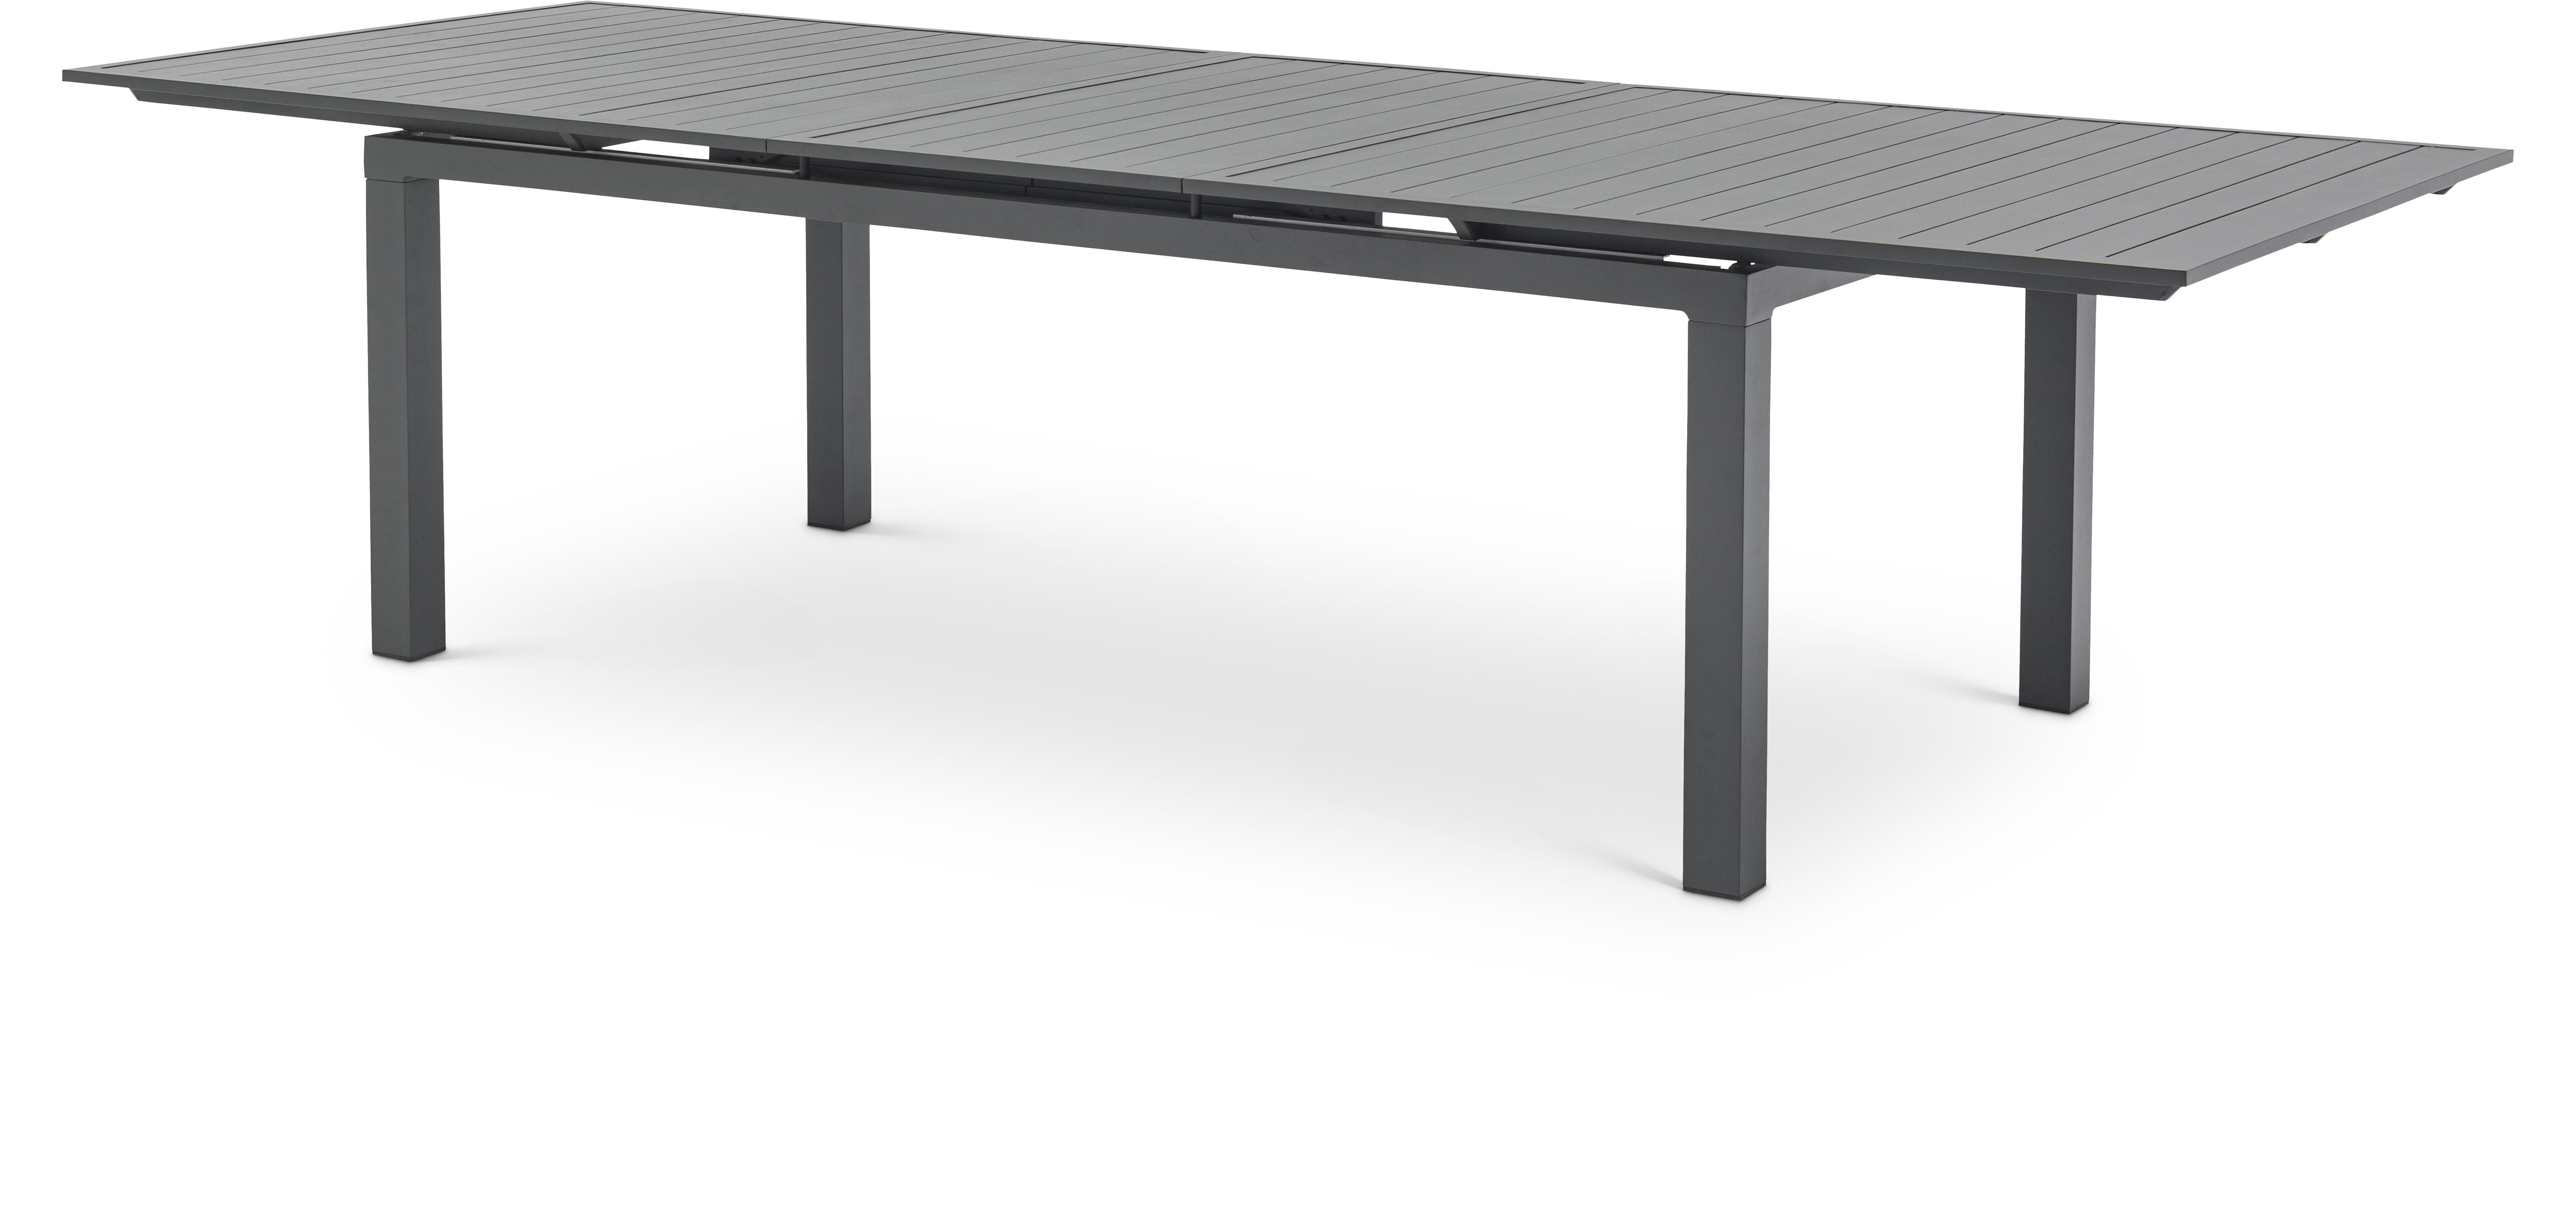 Meridian Furniture Maldives Patio Dining Table 343Grey-T Patio Dining Table